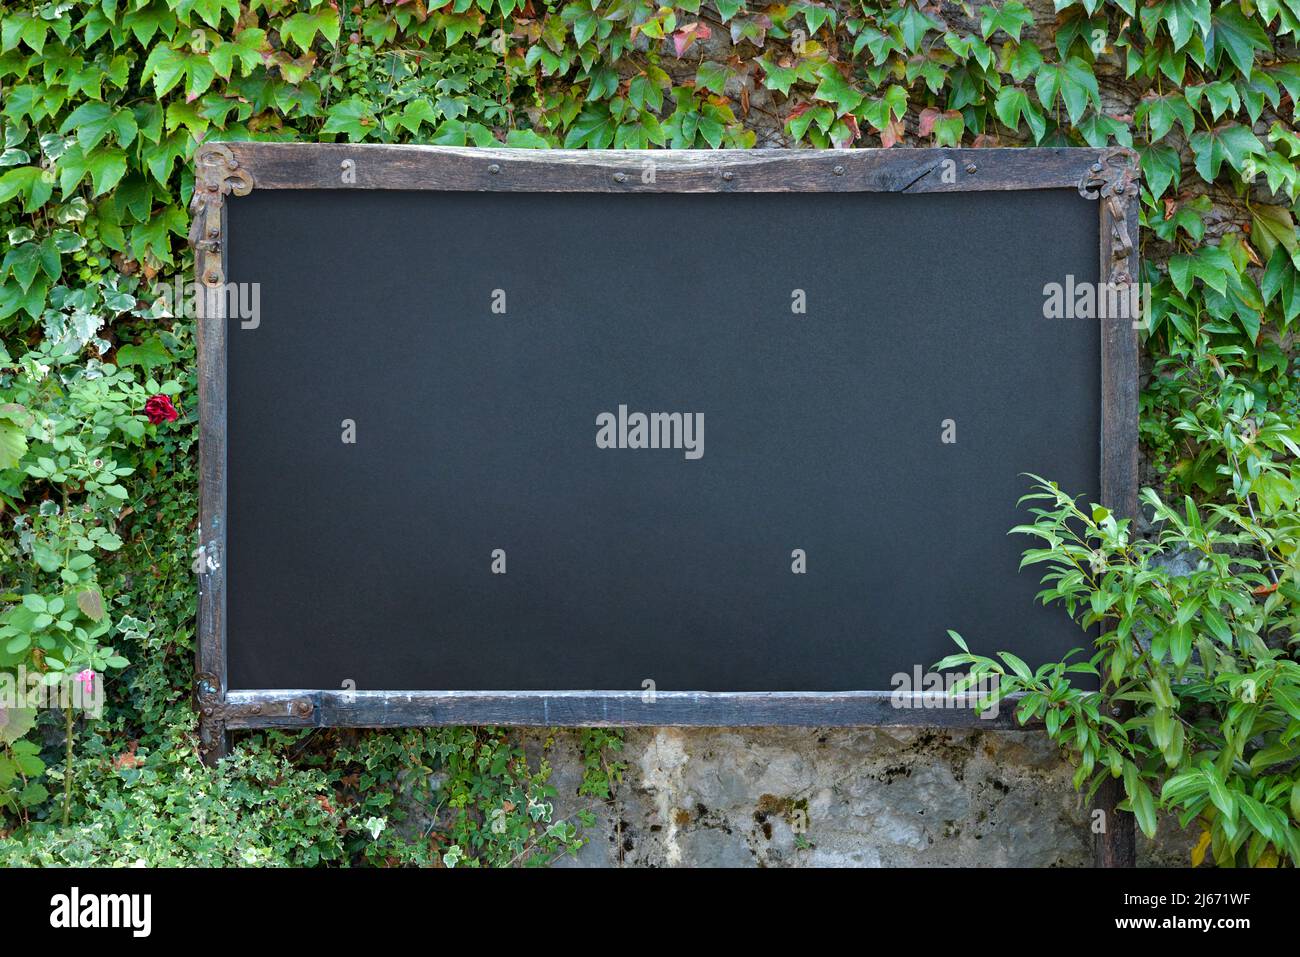 Outdoor rustic chalkboard on stone wall with lots of green plants around. Blank surface for promo menu text presentation Stock Photo